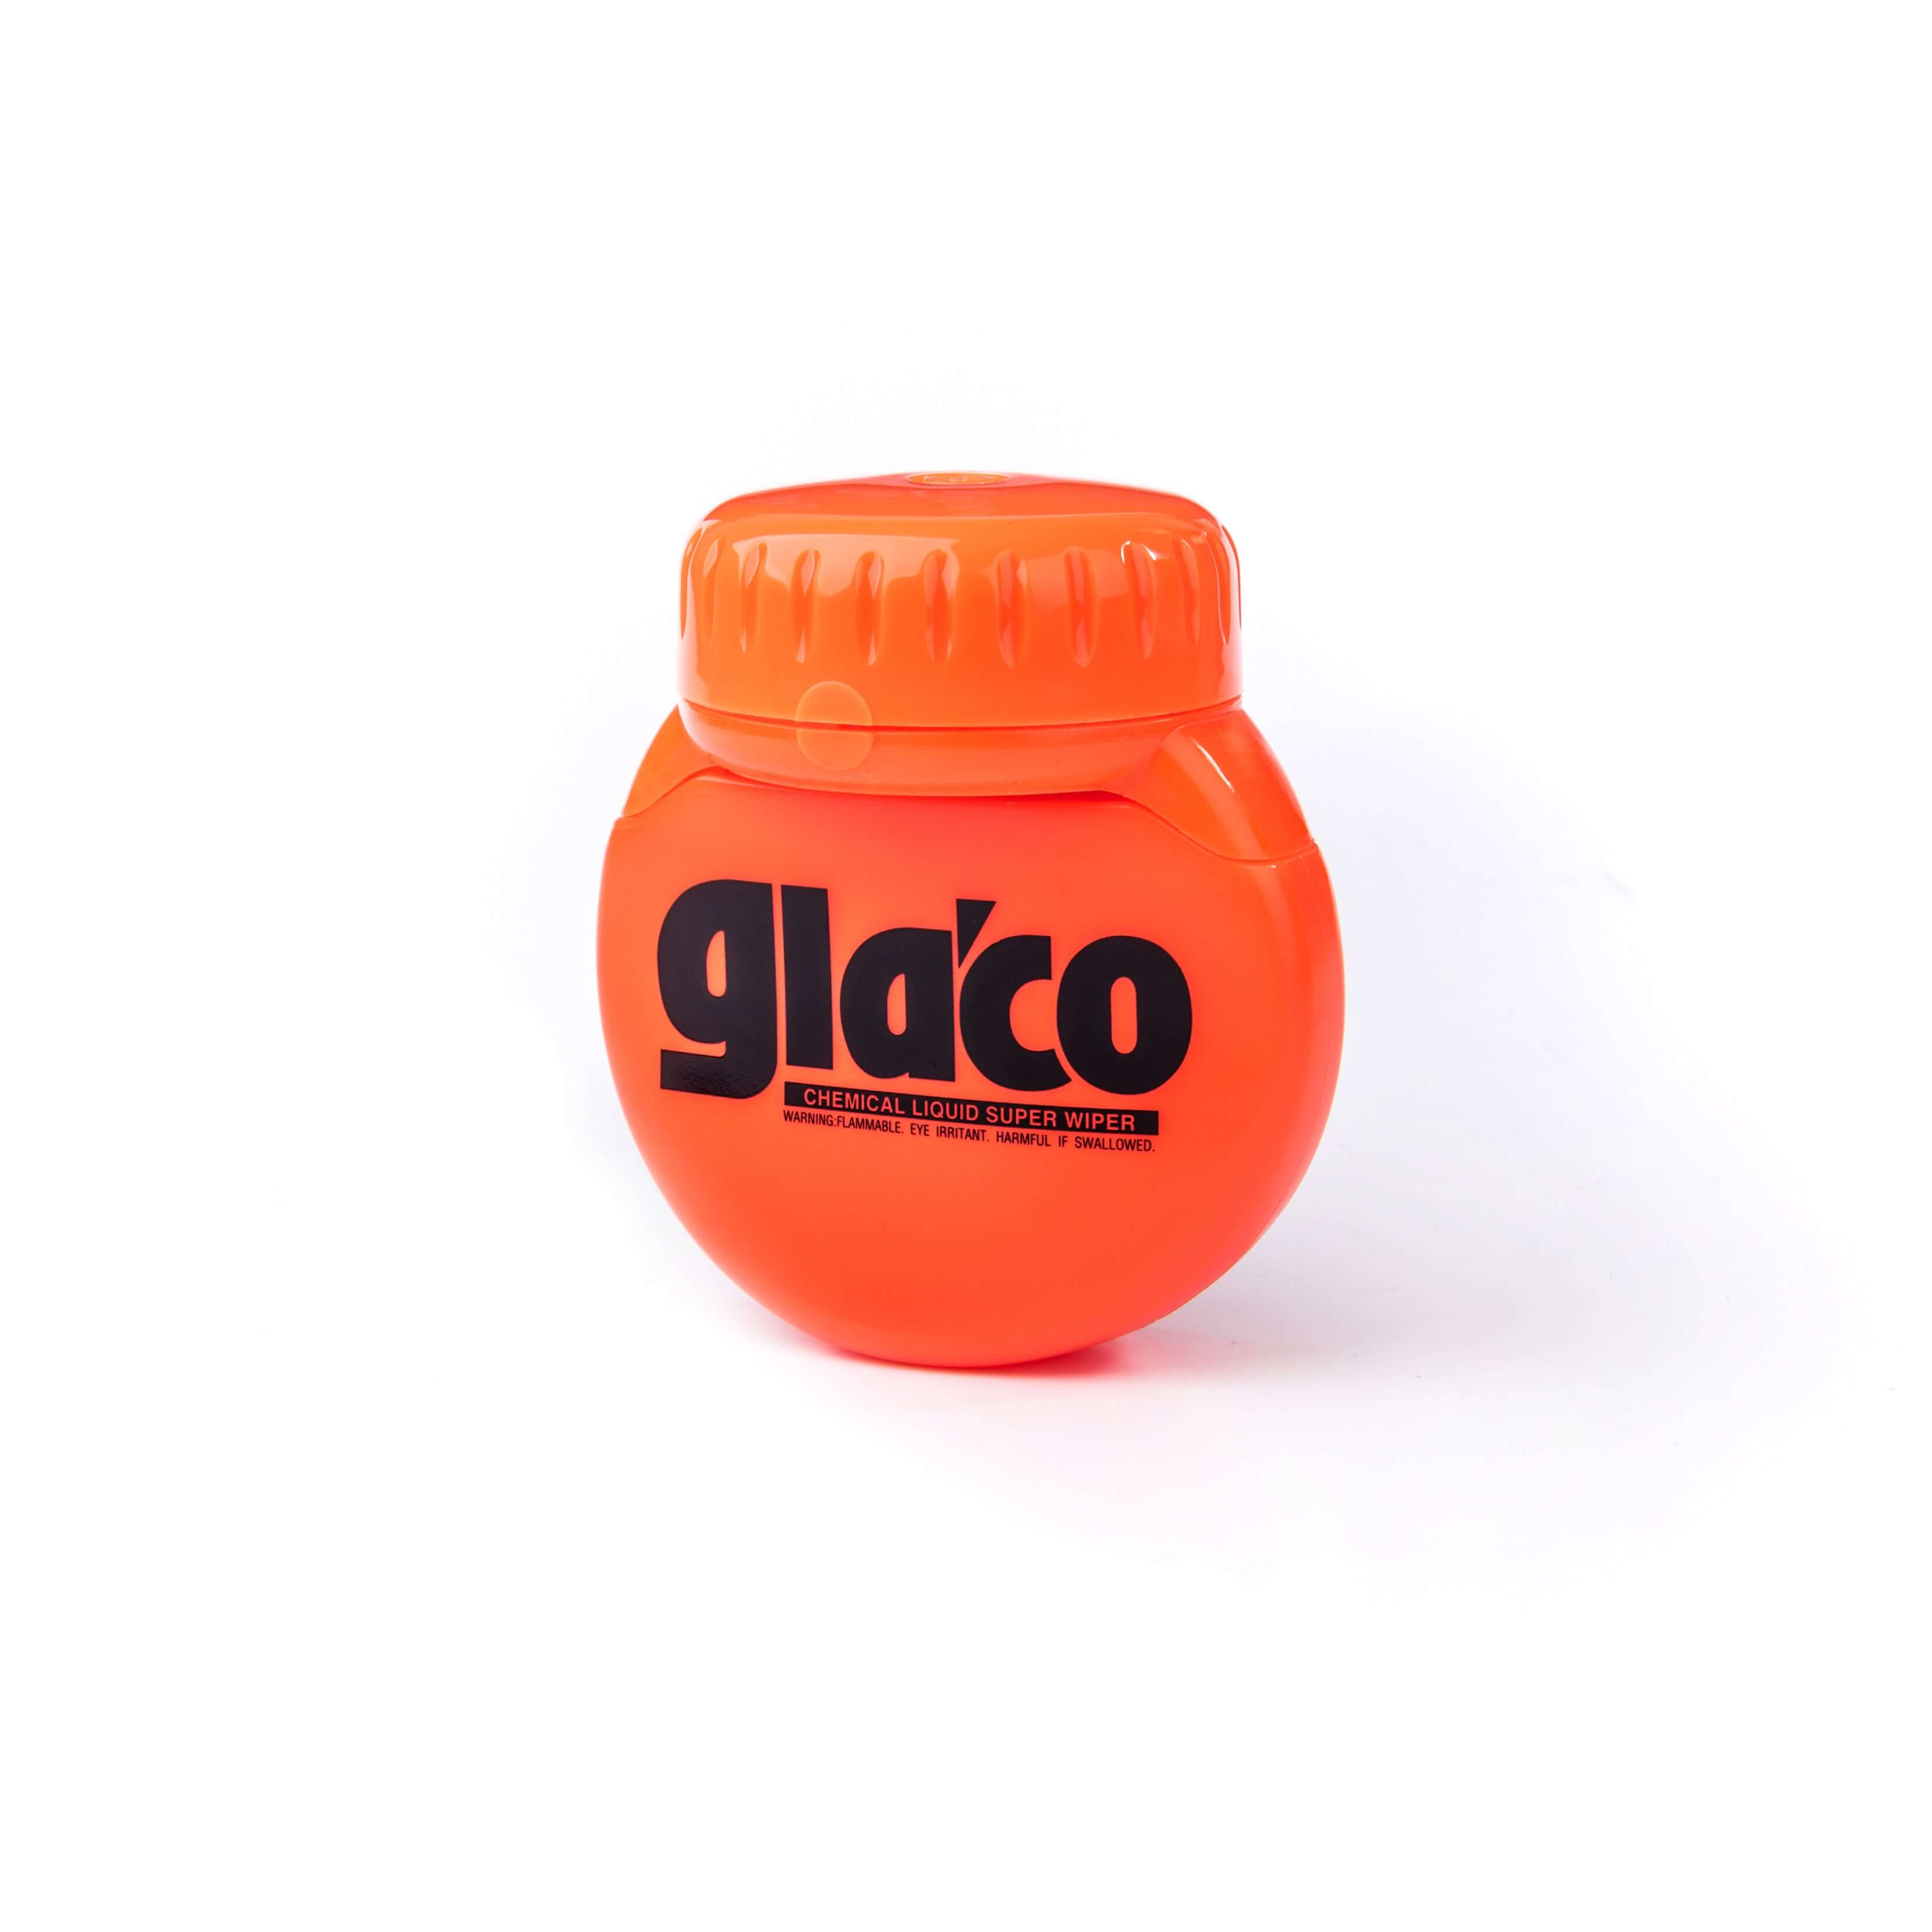 Soft 99 Glaco Roll On Large (120ml)